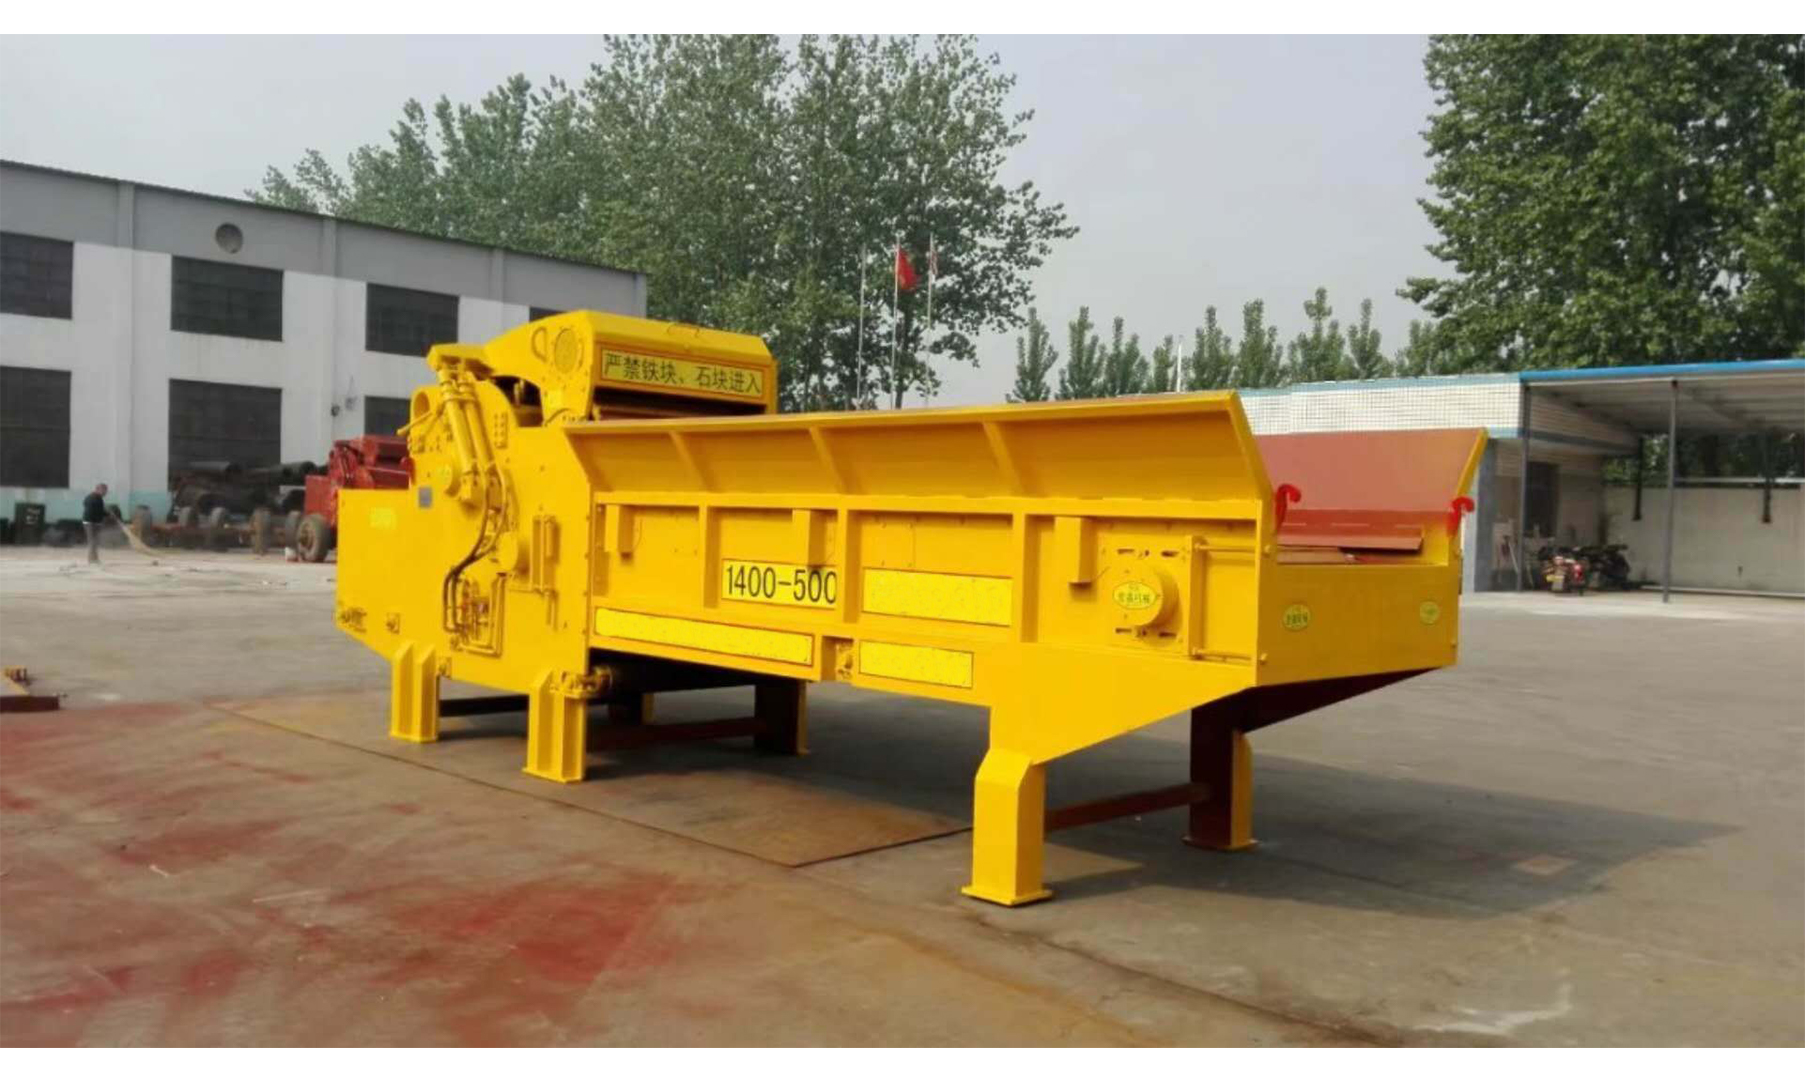 weiwei wood crusher can process 1.2m wide wood, new mobile wood crushing and pro